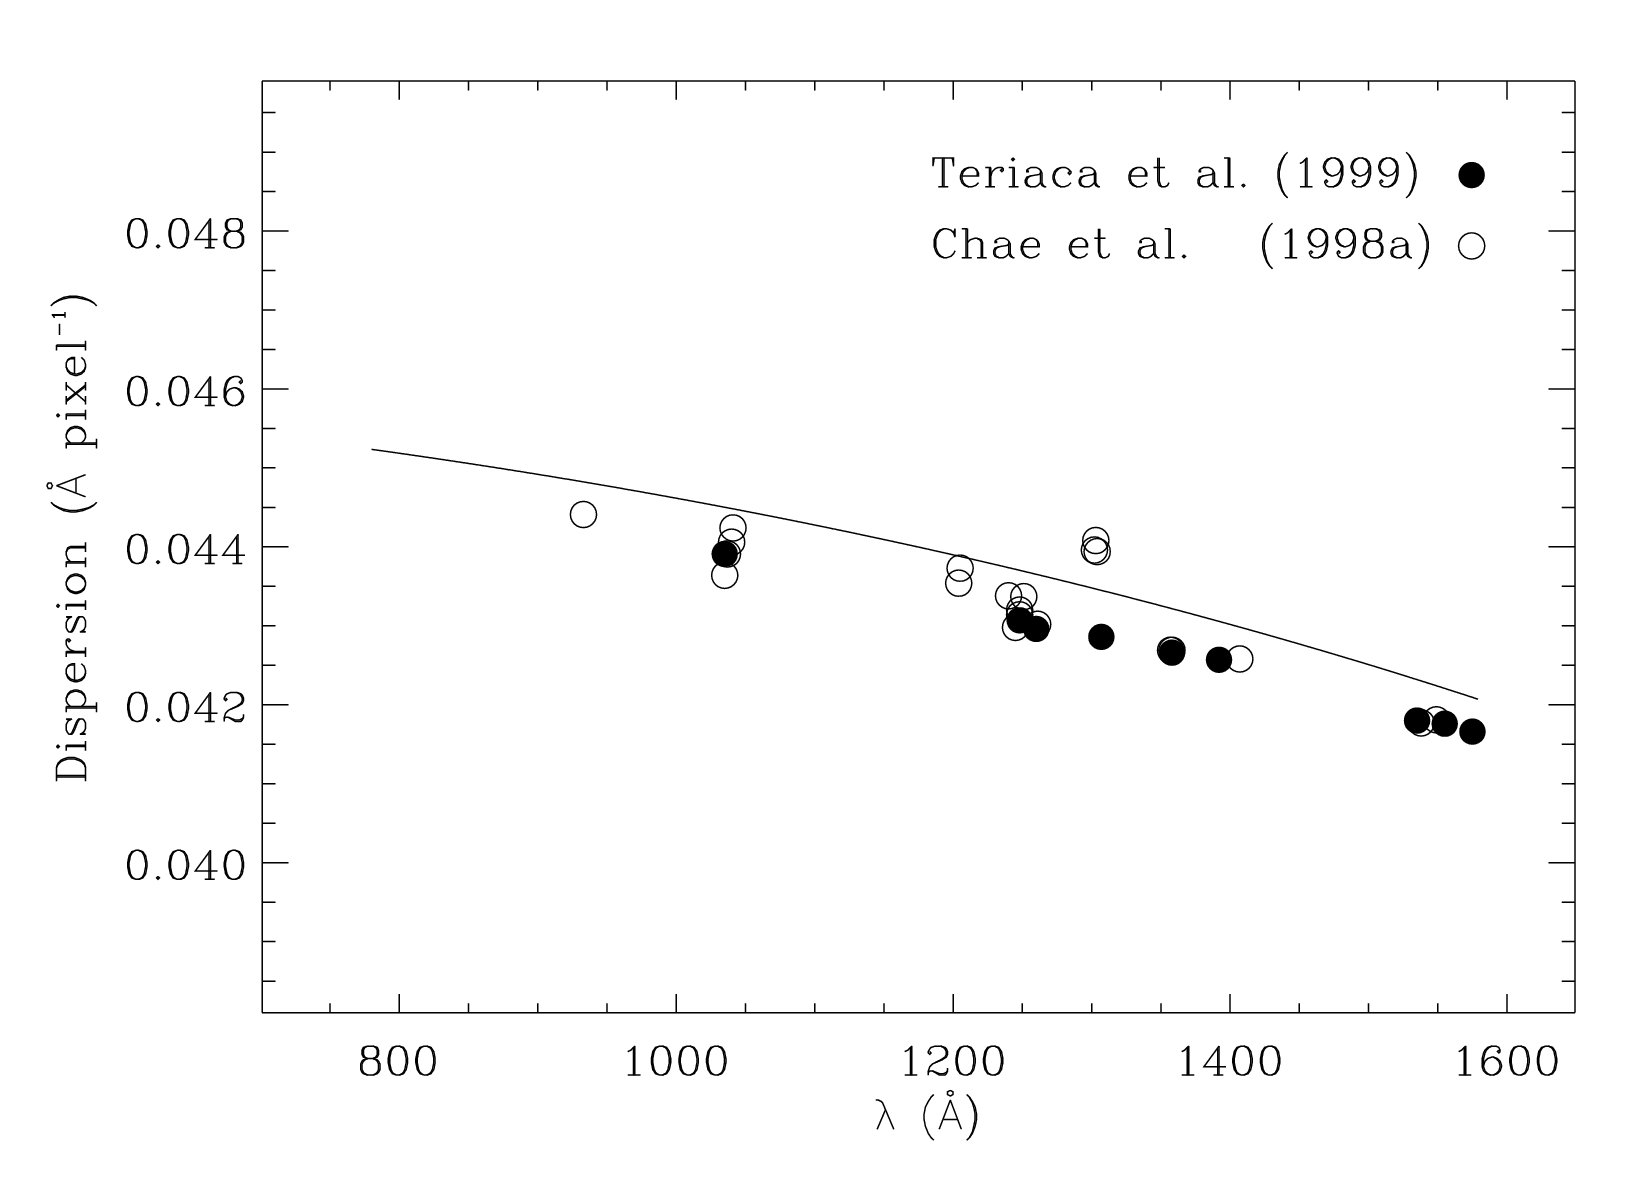 Spectral dispersion for detector A: theoretical and observational
results.